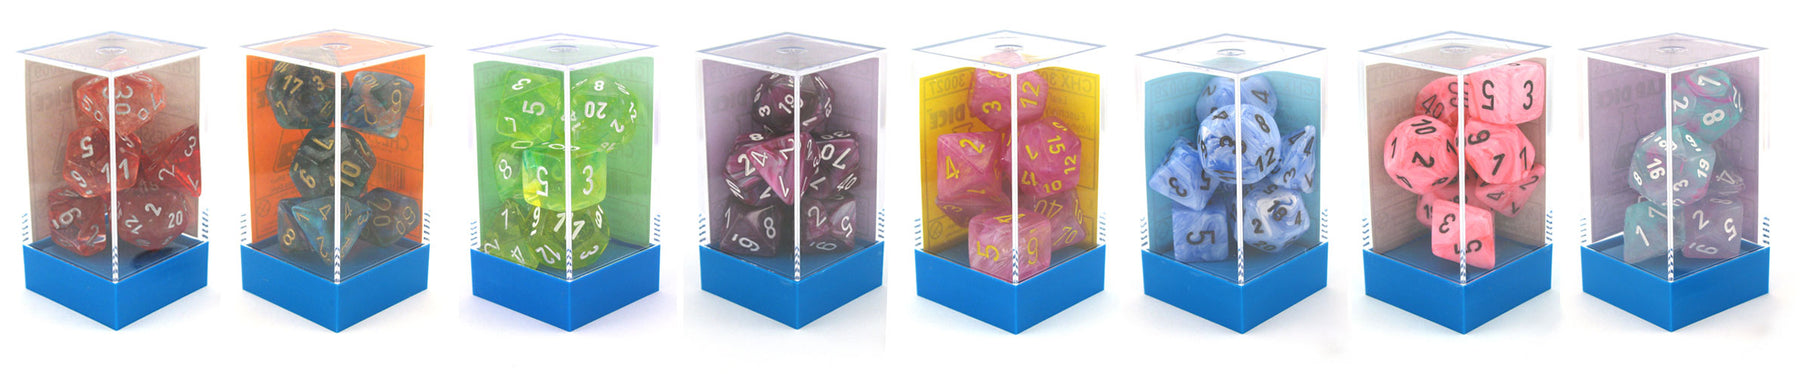 Lab Dice 2 from Chessex Set for October 3 Release